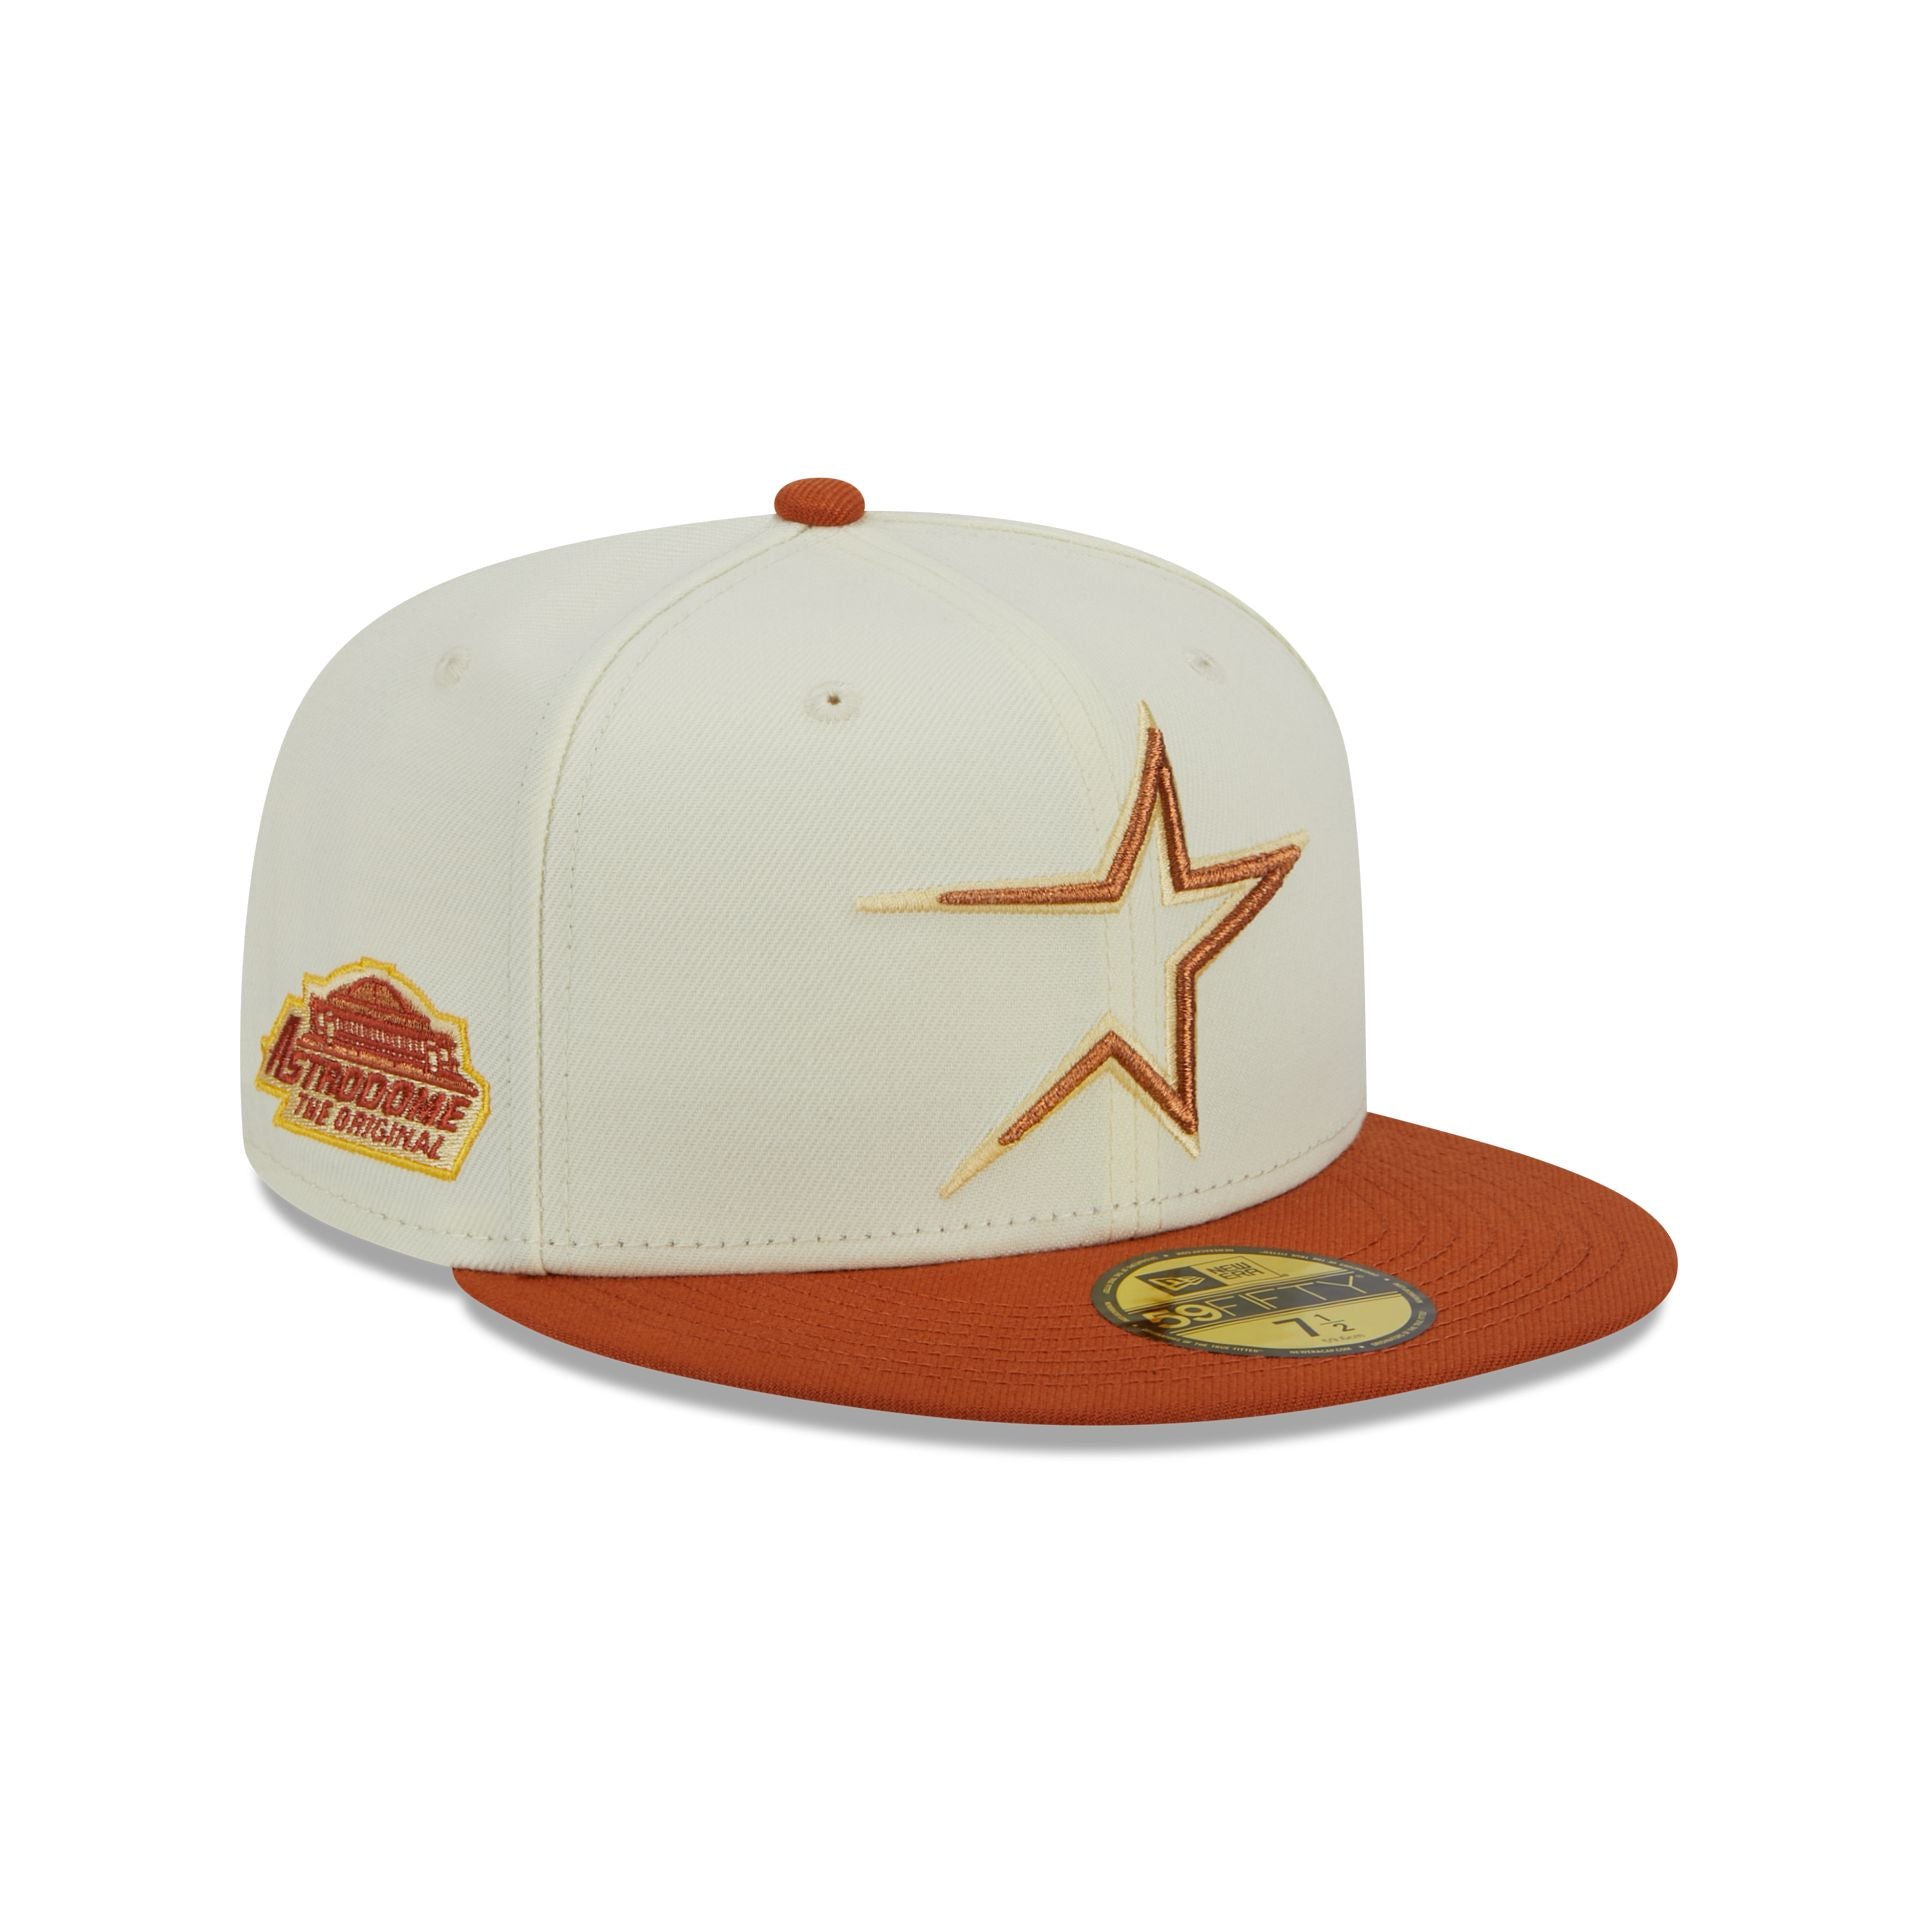 Houston Astros New Era 59FIFTY Fitted Hat - Vegas Gold/Cardinal